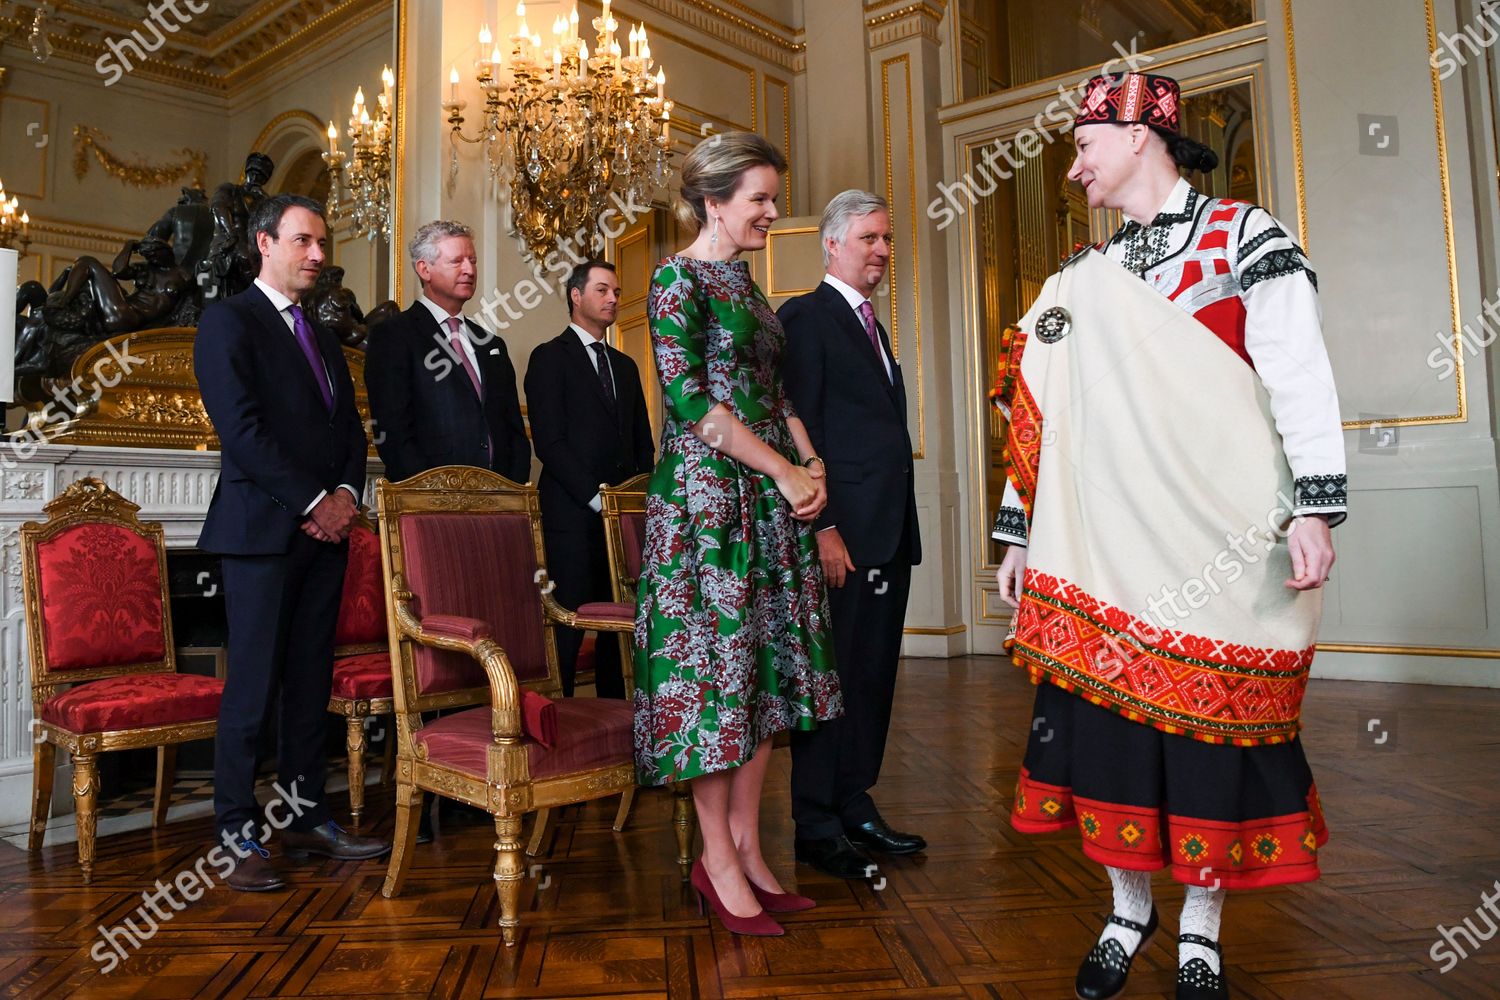 king-philippe-and-queen-mathilde-receive-the-heads-of-diplomatic-missions-brussels-belgium-shutterstock-editorial-10525487y.jpg